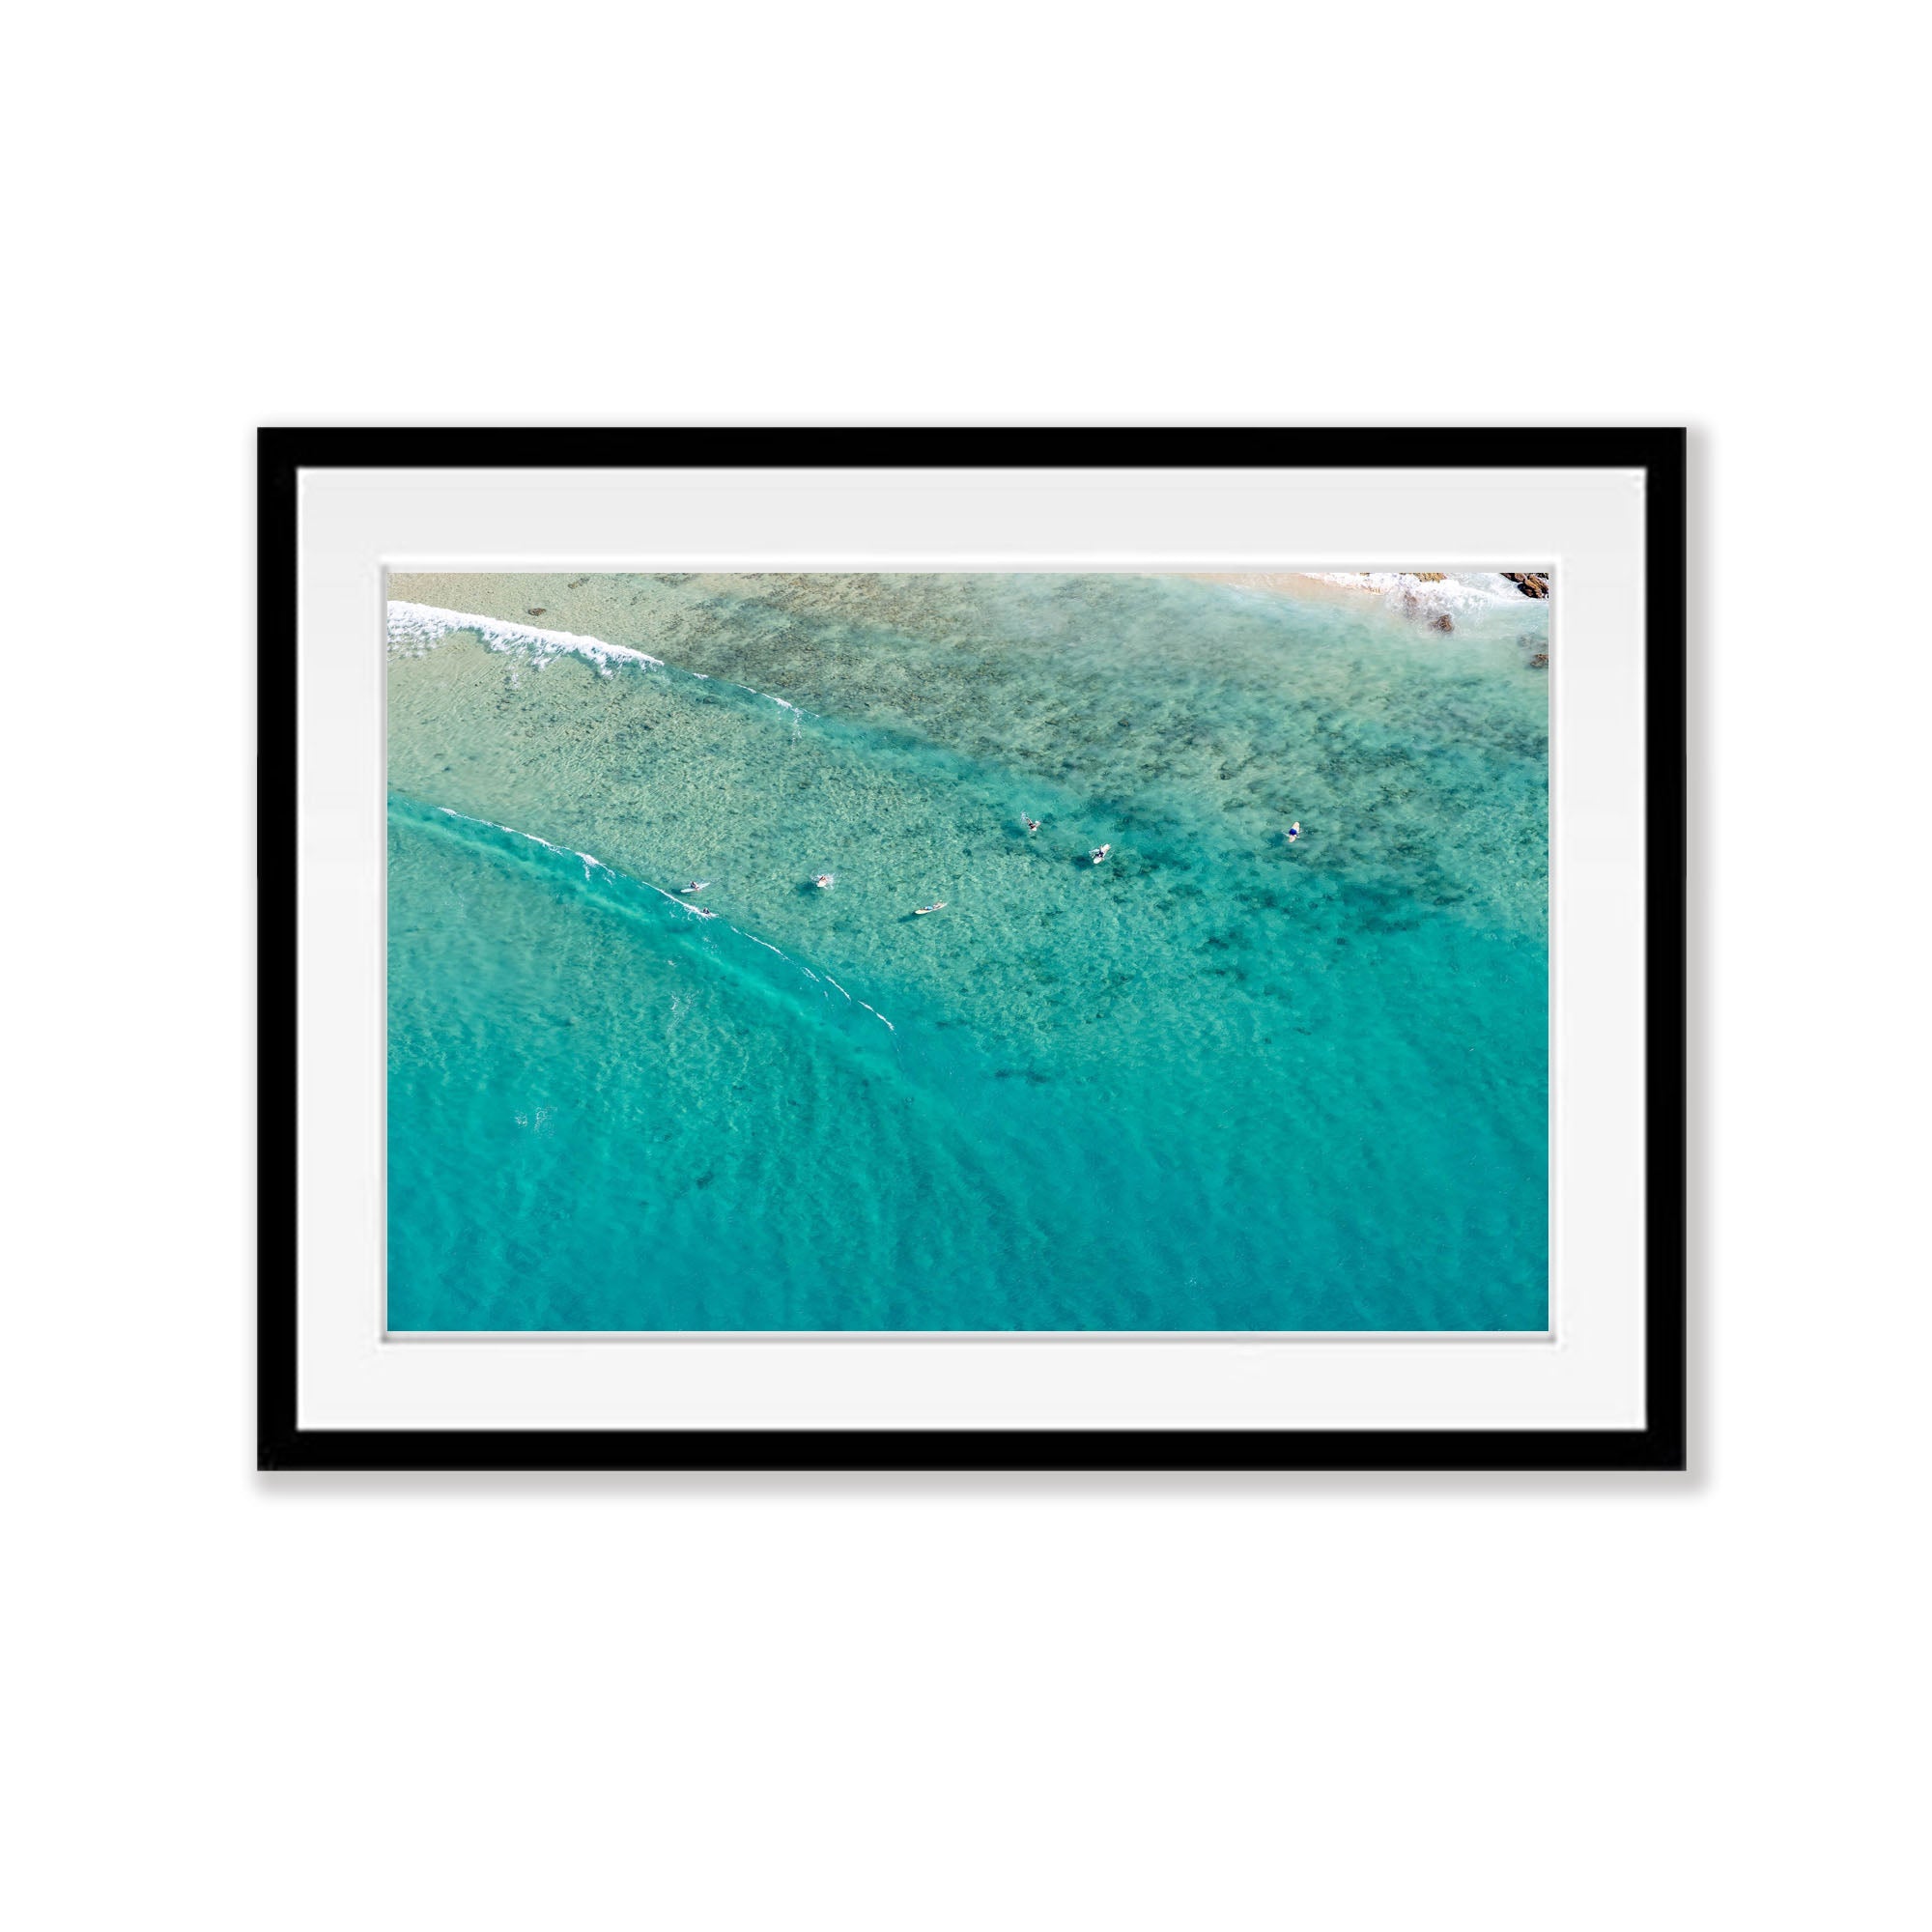 Surfers from above No.2, Noosa National Park, Queensland